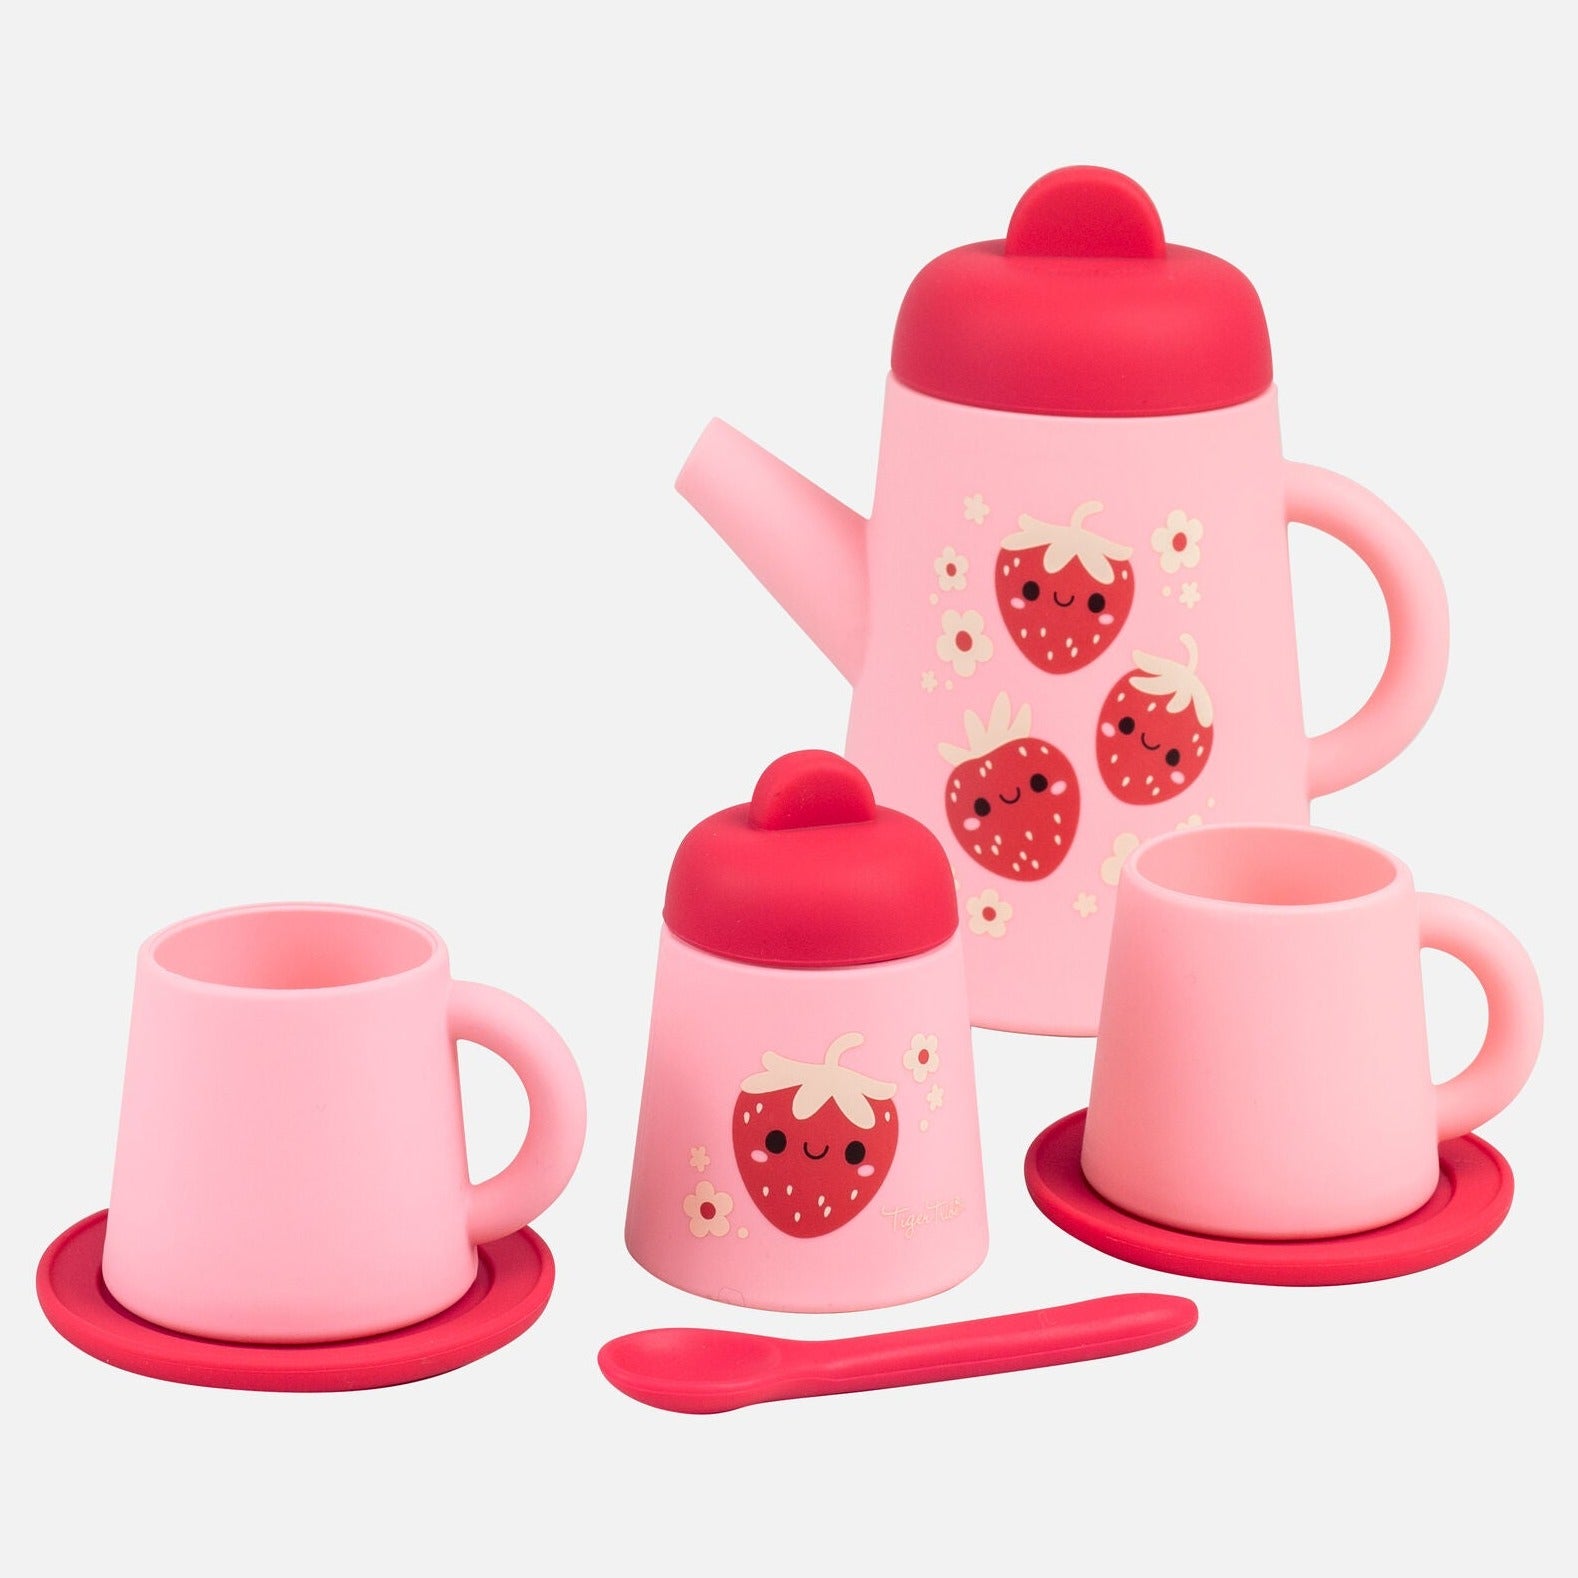 Tiger Tribe Silicone Tea Set - Strawberry Patch